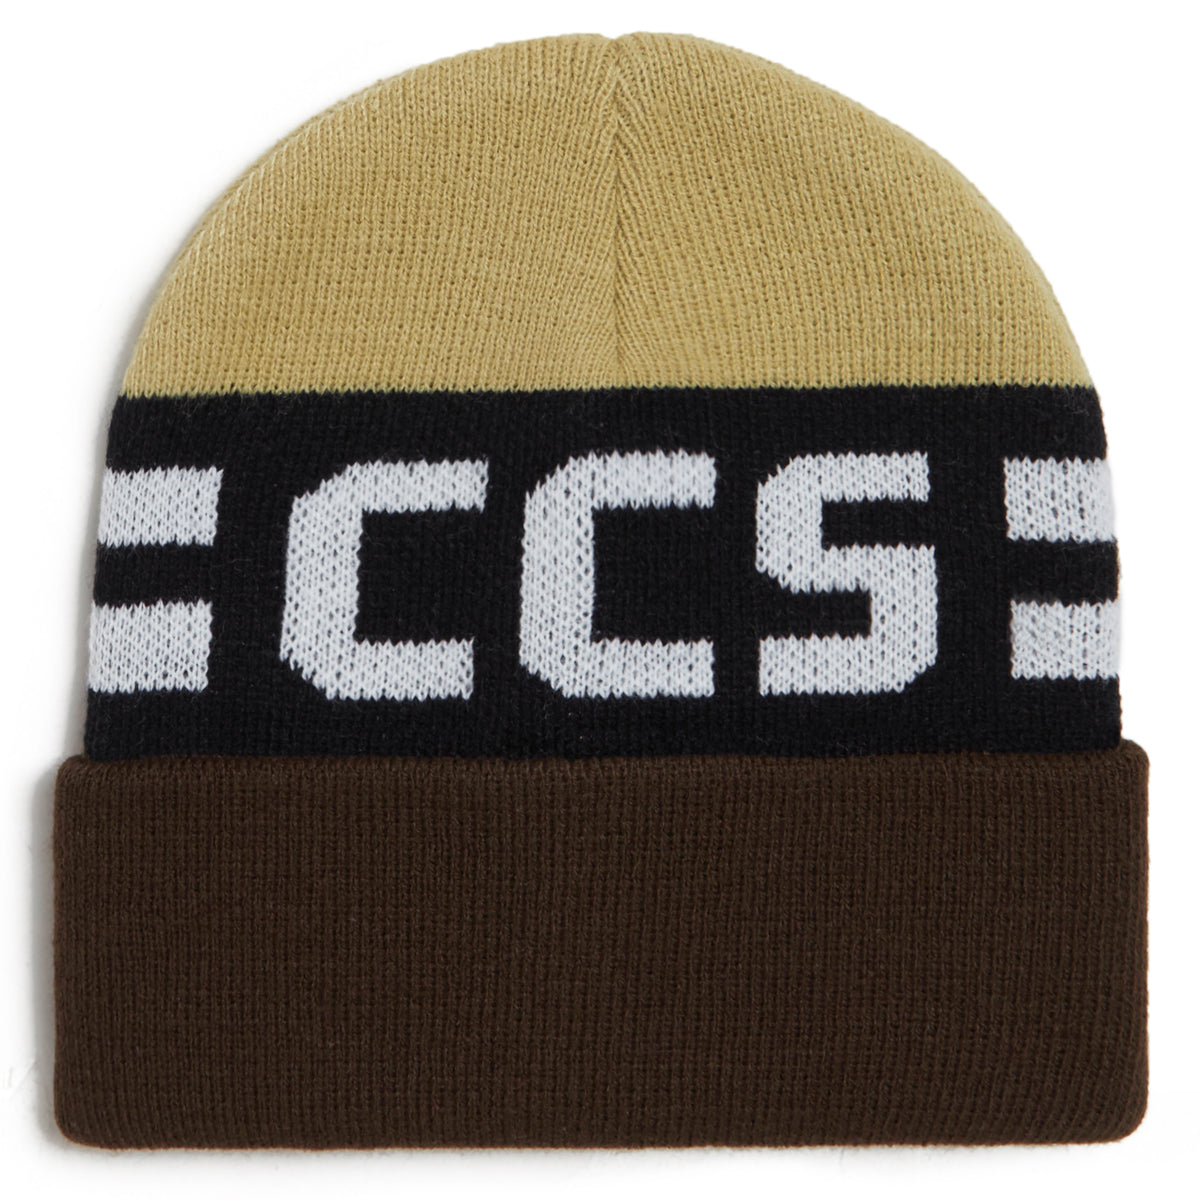 CCS Blockletters Beanie - Brown/Tan image 1